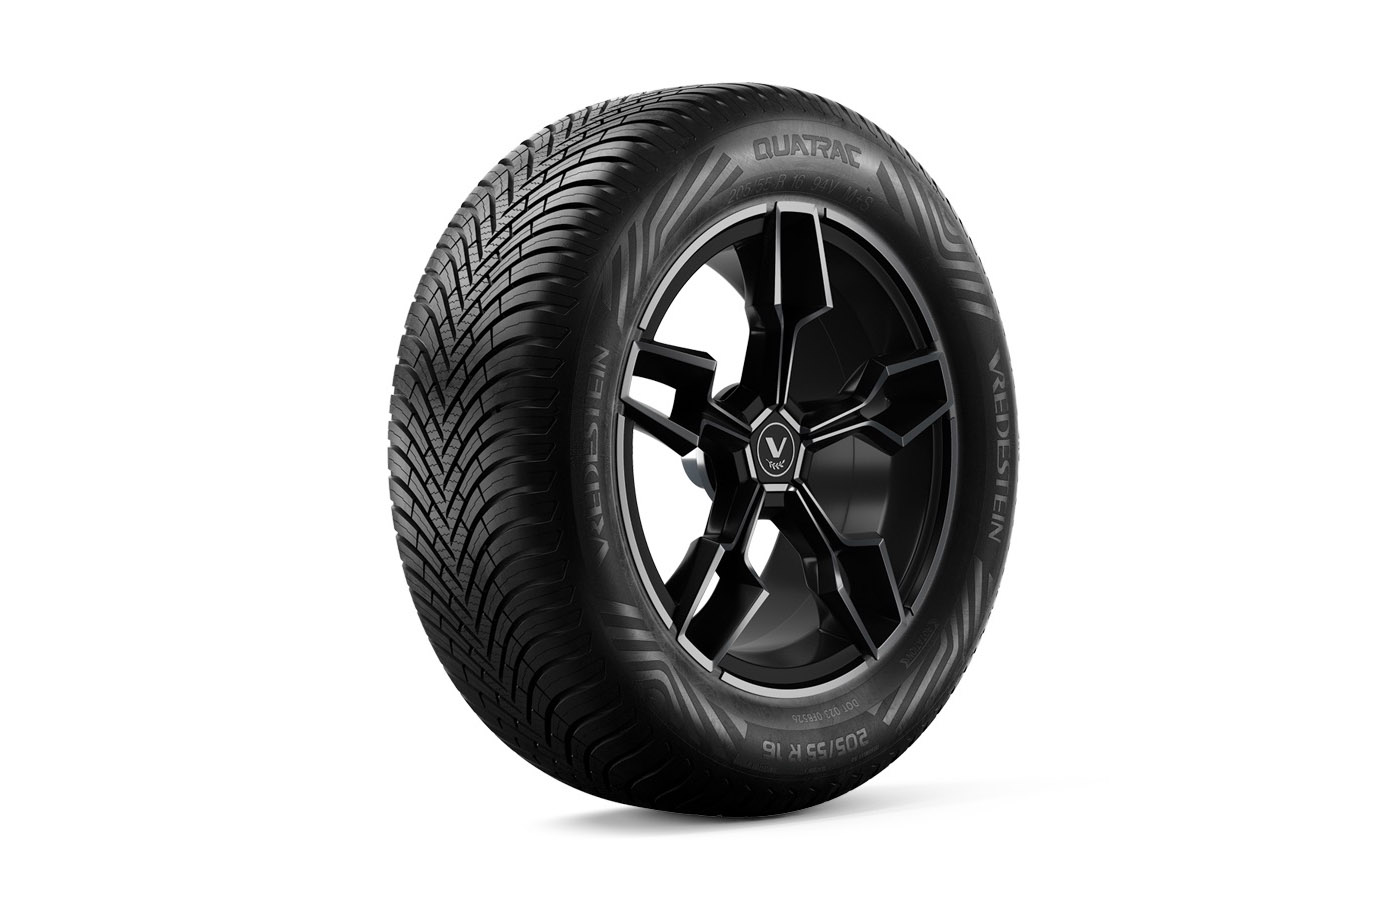 Vredestein Quatrac - Tyre Reviews and Tests